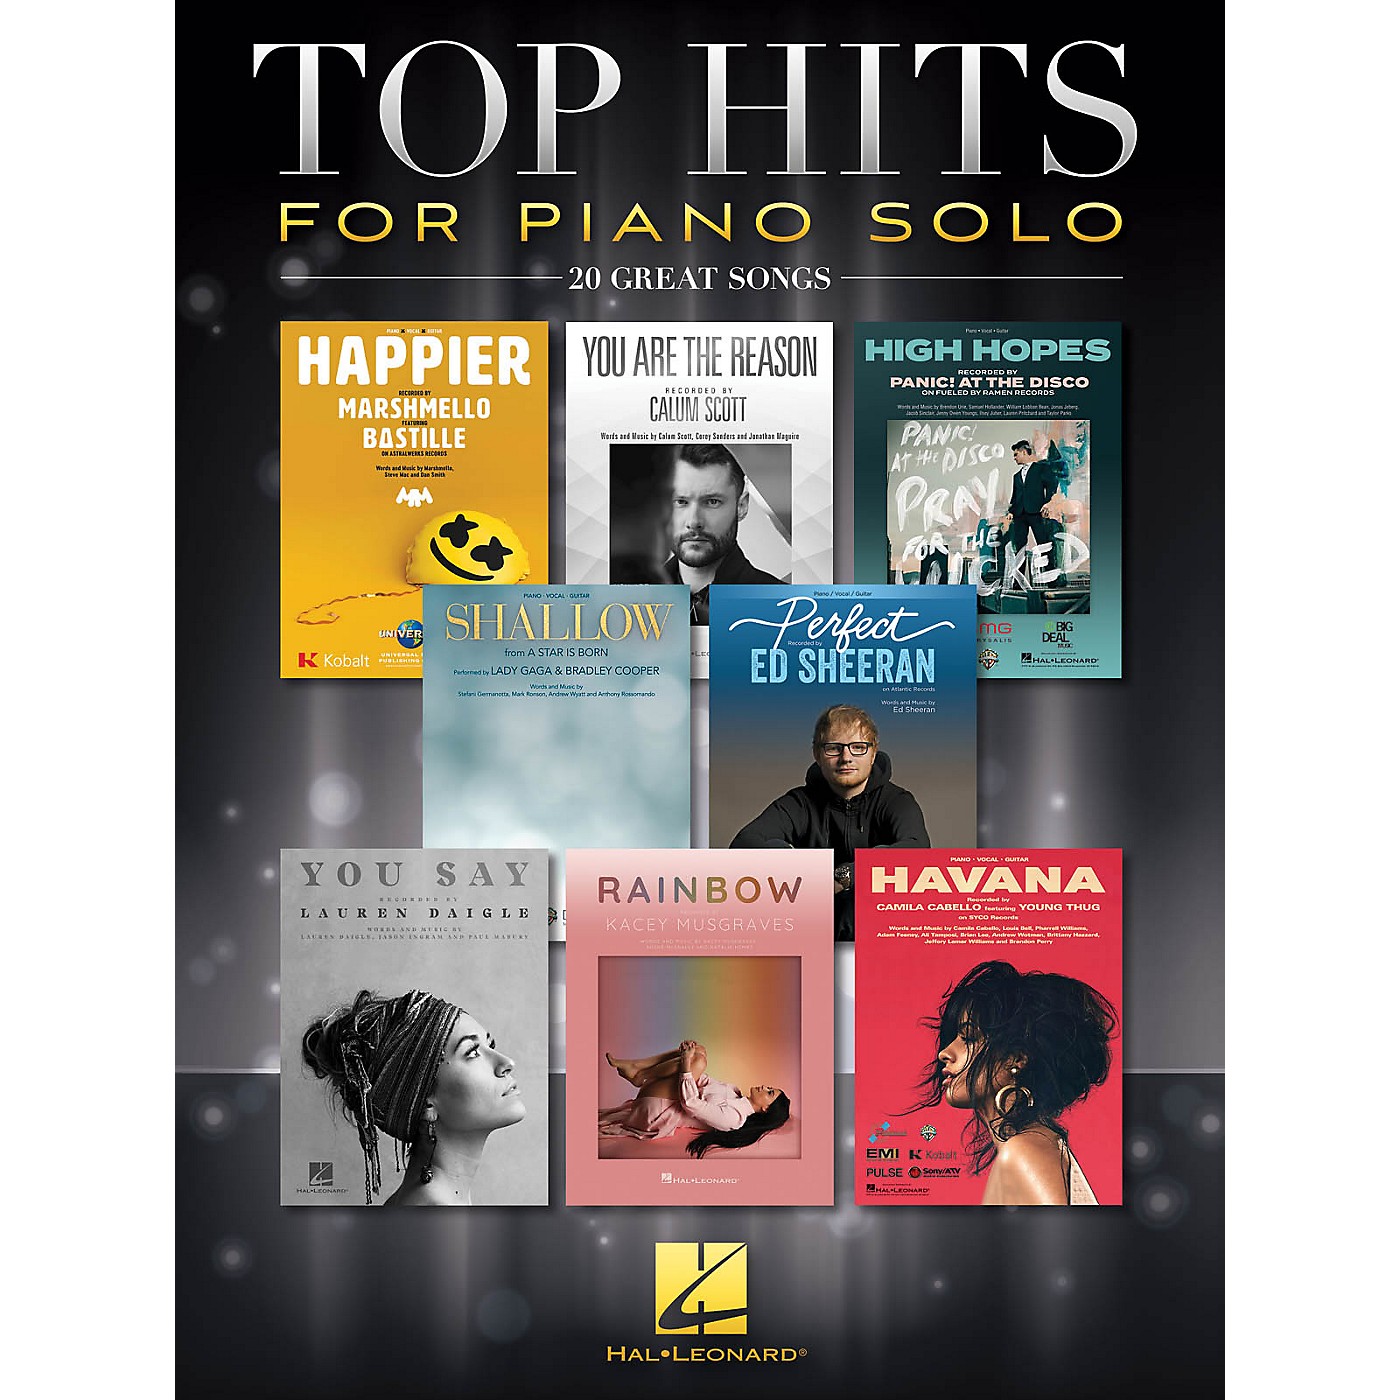 Hal Leonard Top Hits for Piano Solo (20 Great Songs) Piano Solo Songbook thumbnail